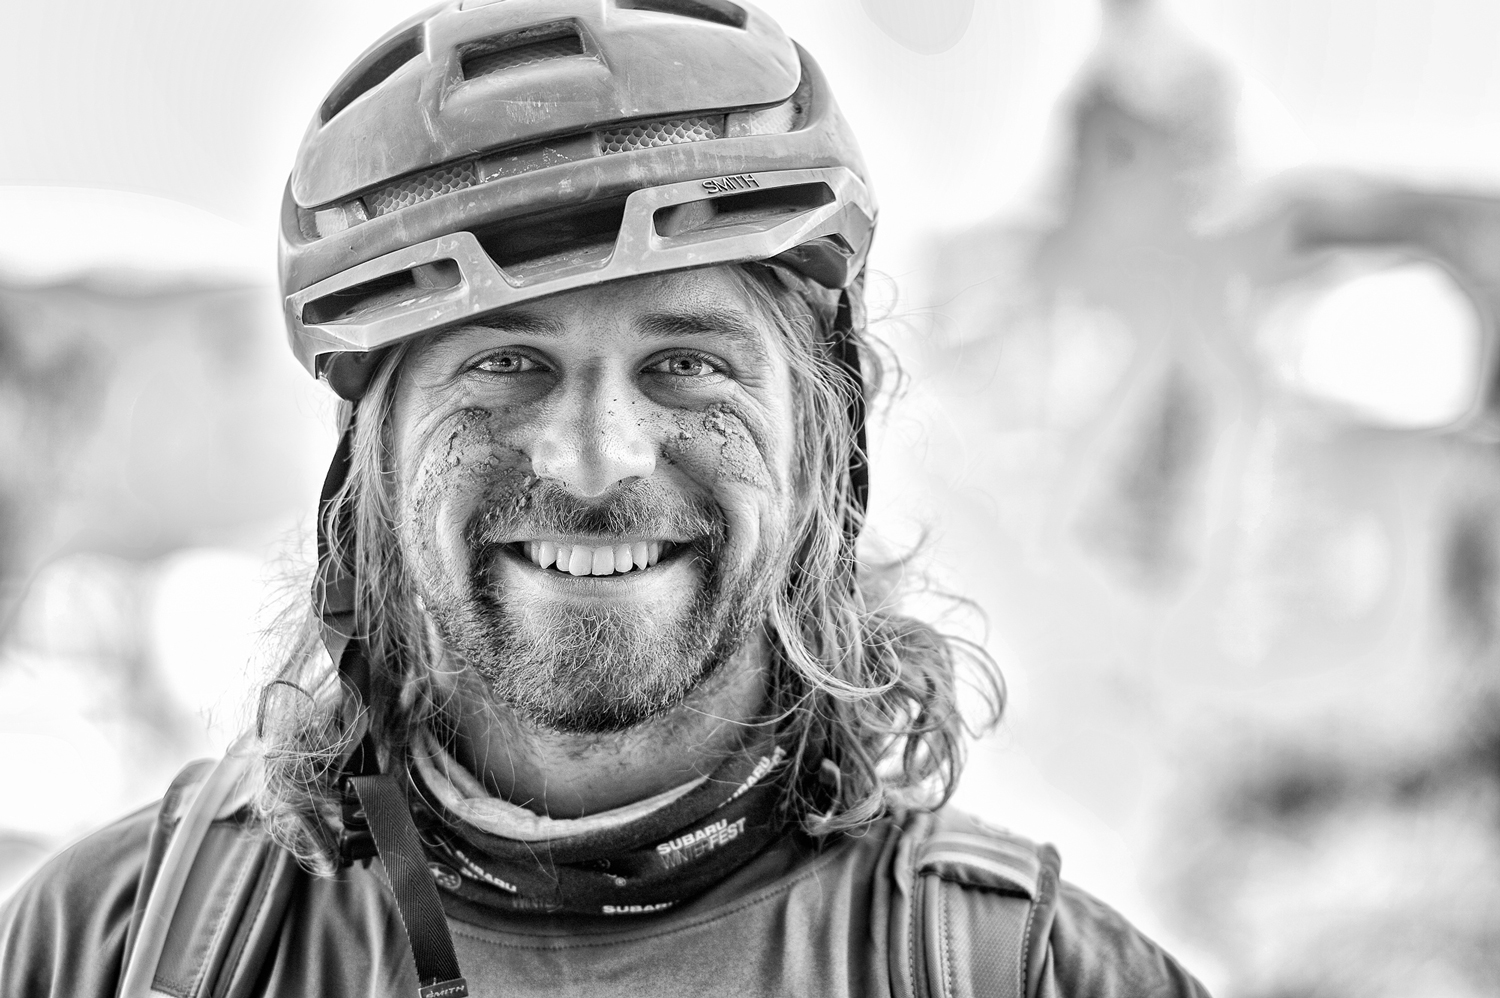 David Poole, an adaptive athlete from Bozeman, Montana, is a past Adventure Team Challenge Colorado participant who traveled to Charlotte for the Challenge. Photograph by Tony Granata.